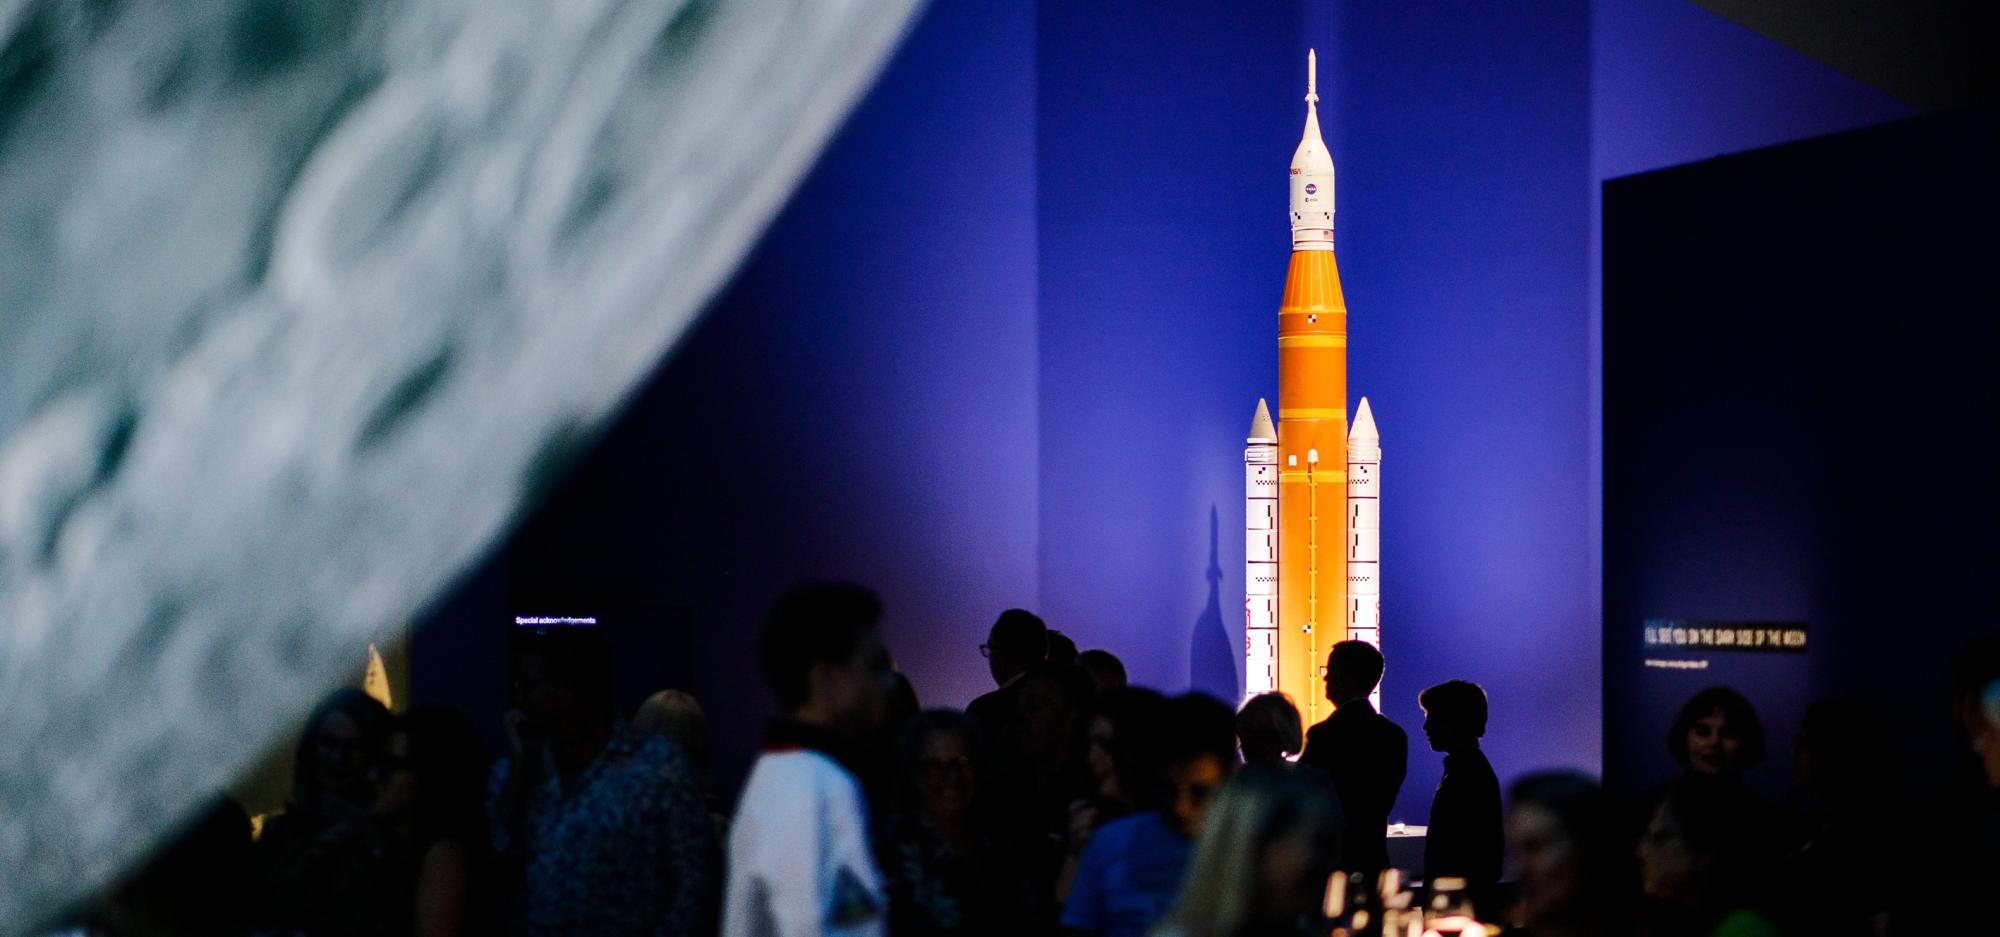 A orange and white model of a rocket is brightly lit in a darkened Museum space. A section of a large moon sculpture shines in the left hand side of the frame and silhouettes of people mill around beneath it.